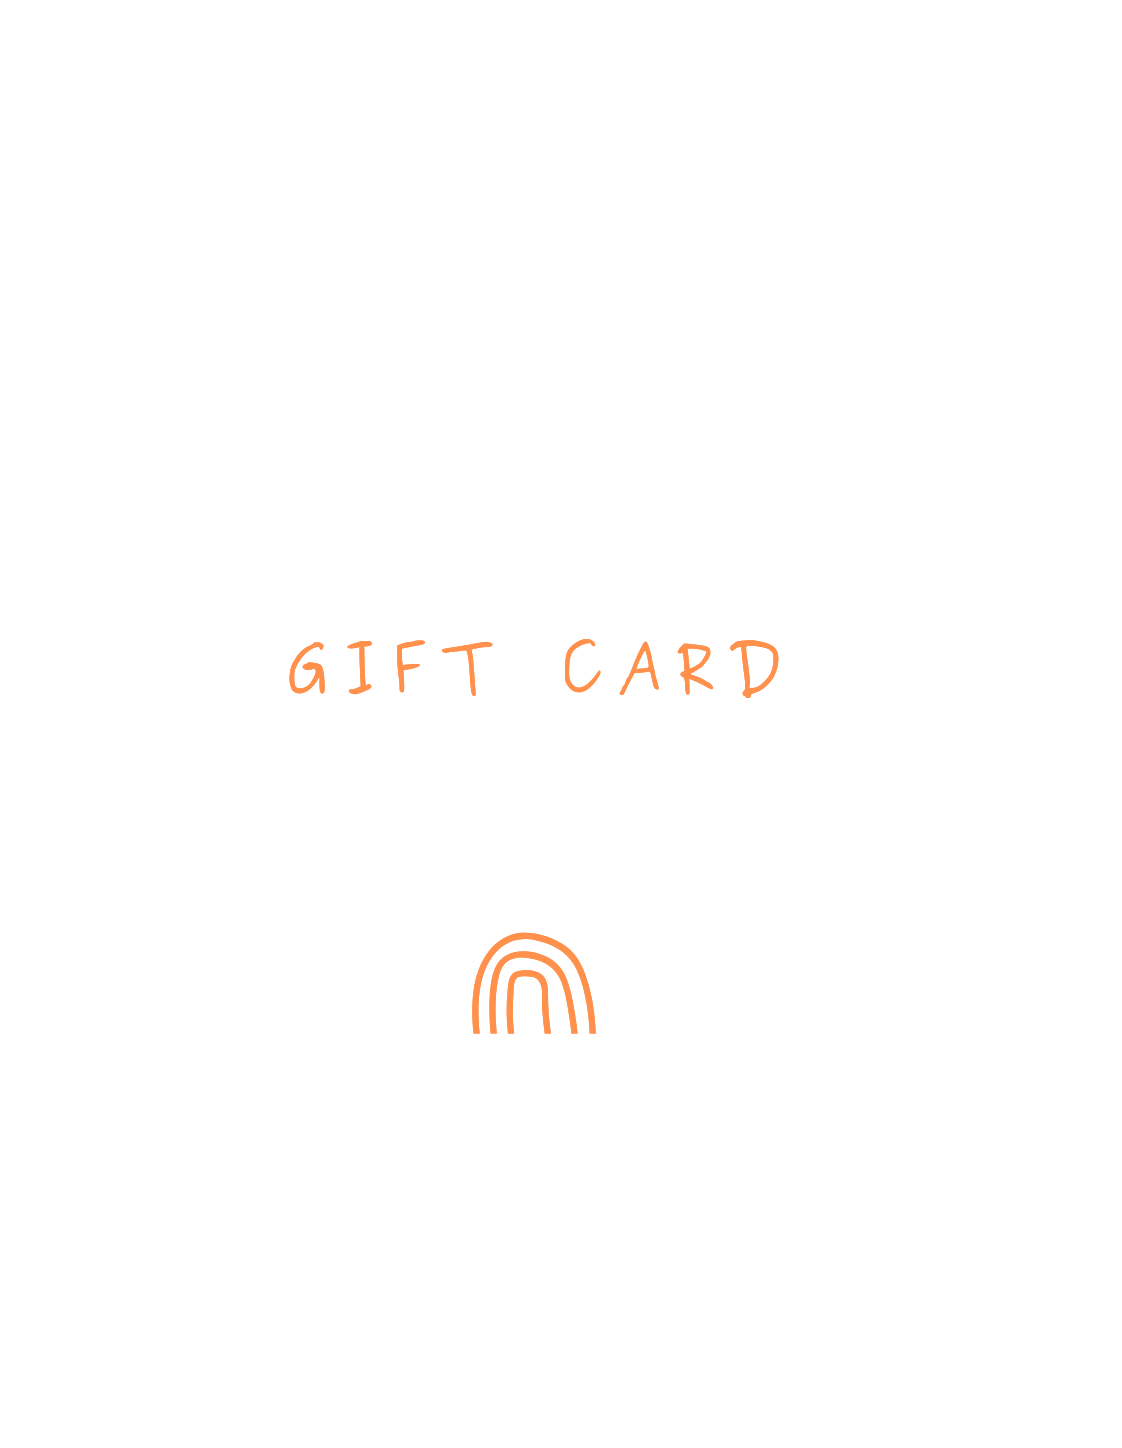 Chlues gift card - Chlues